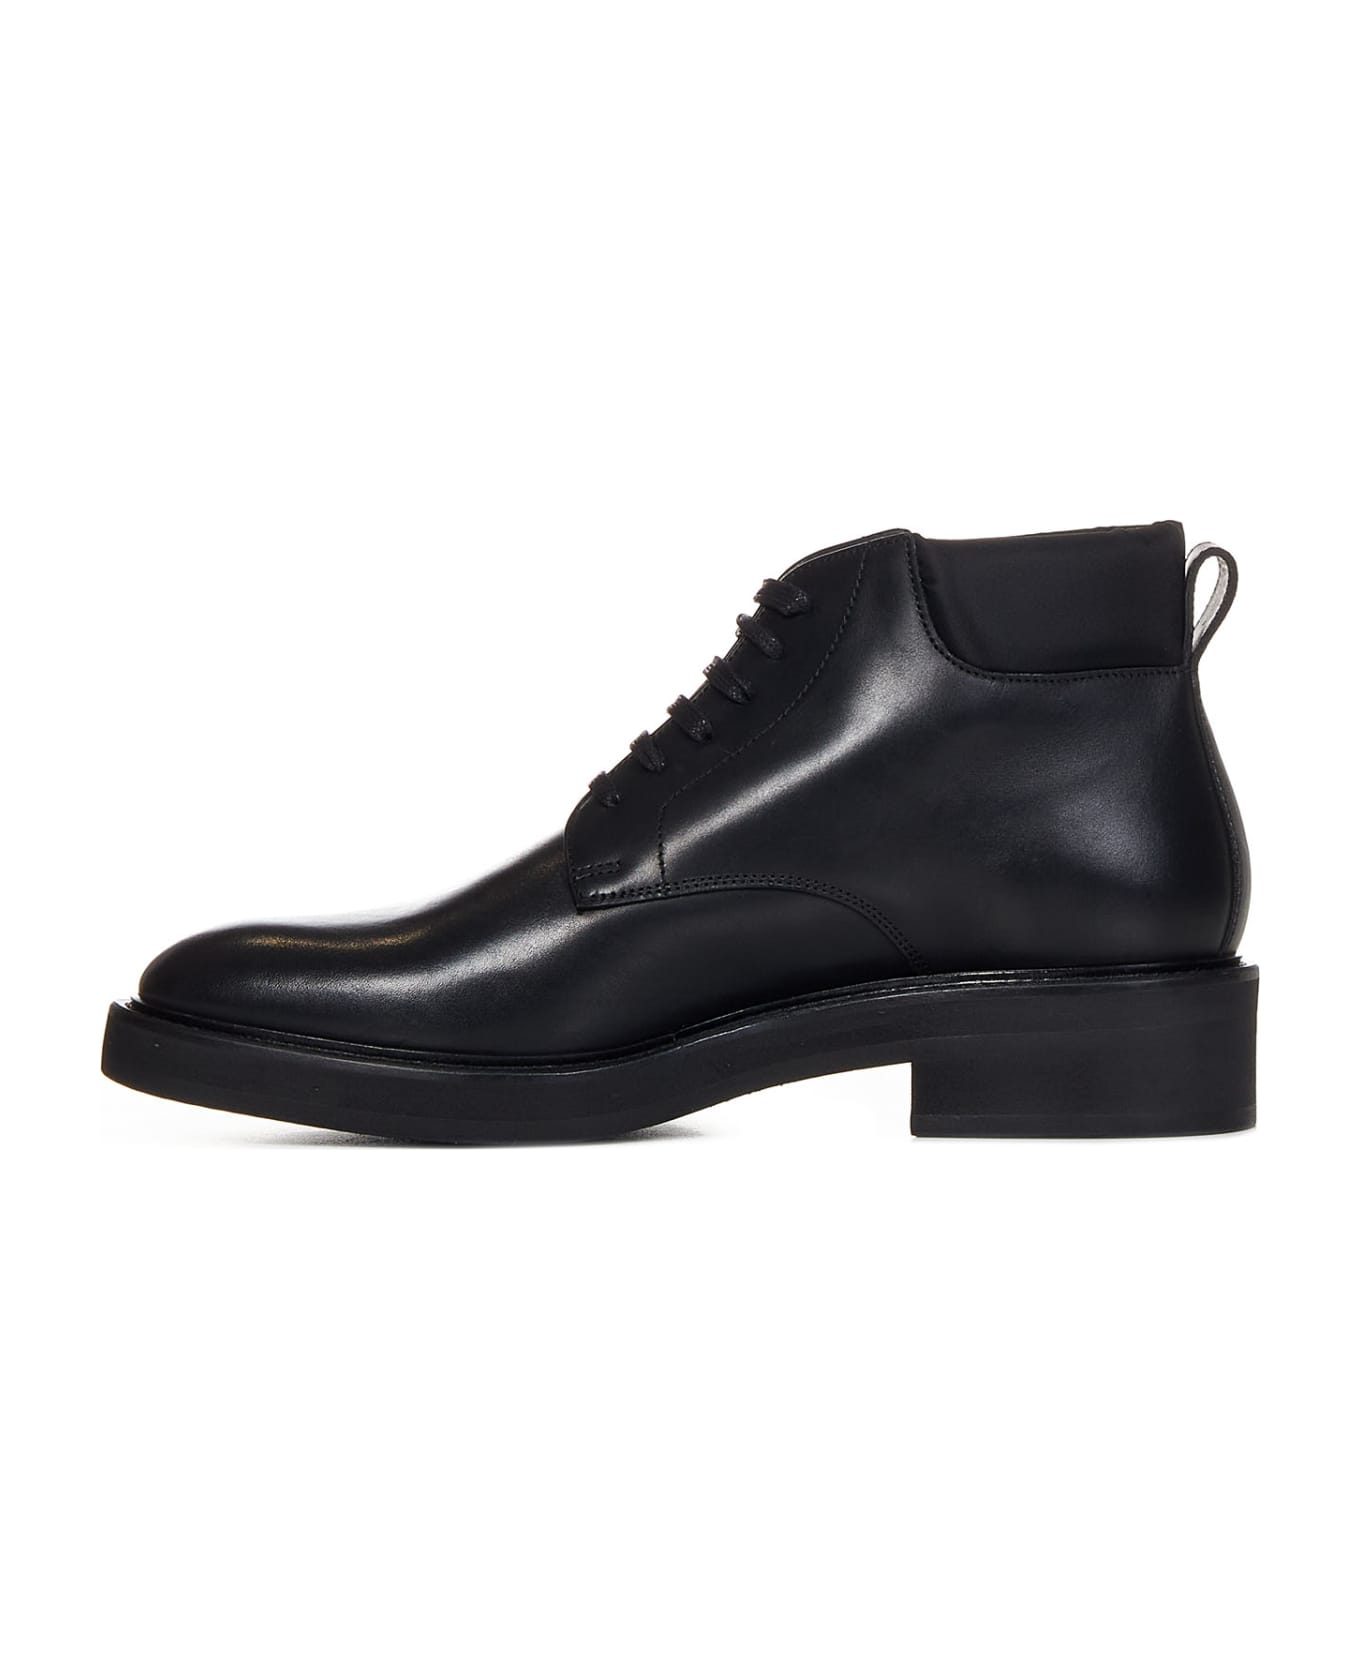 Dsquared2 Manchester City Boots - Black ローファー＆デッキシューズ